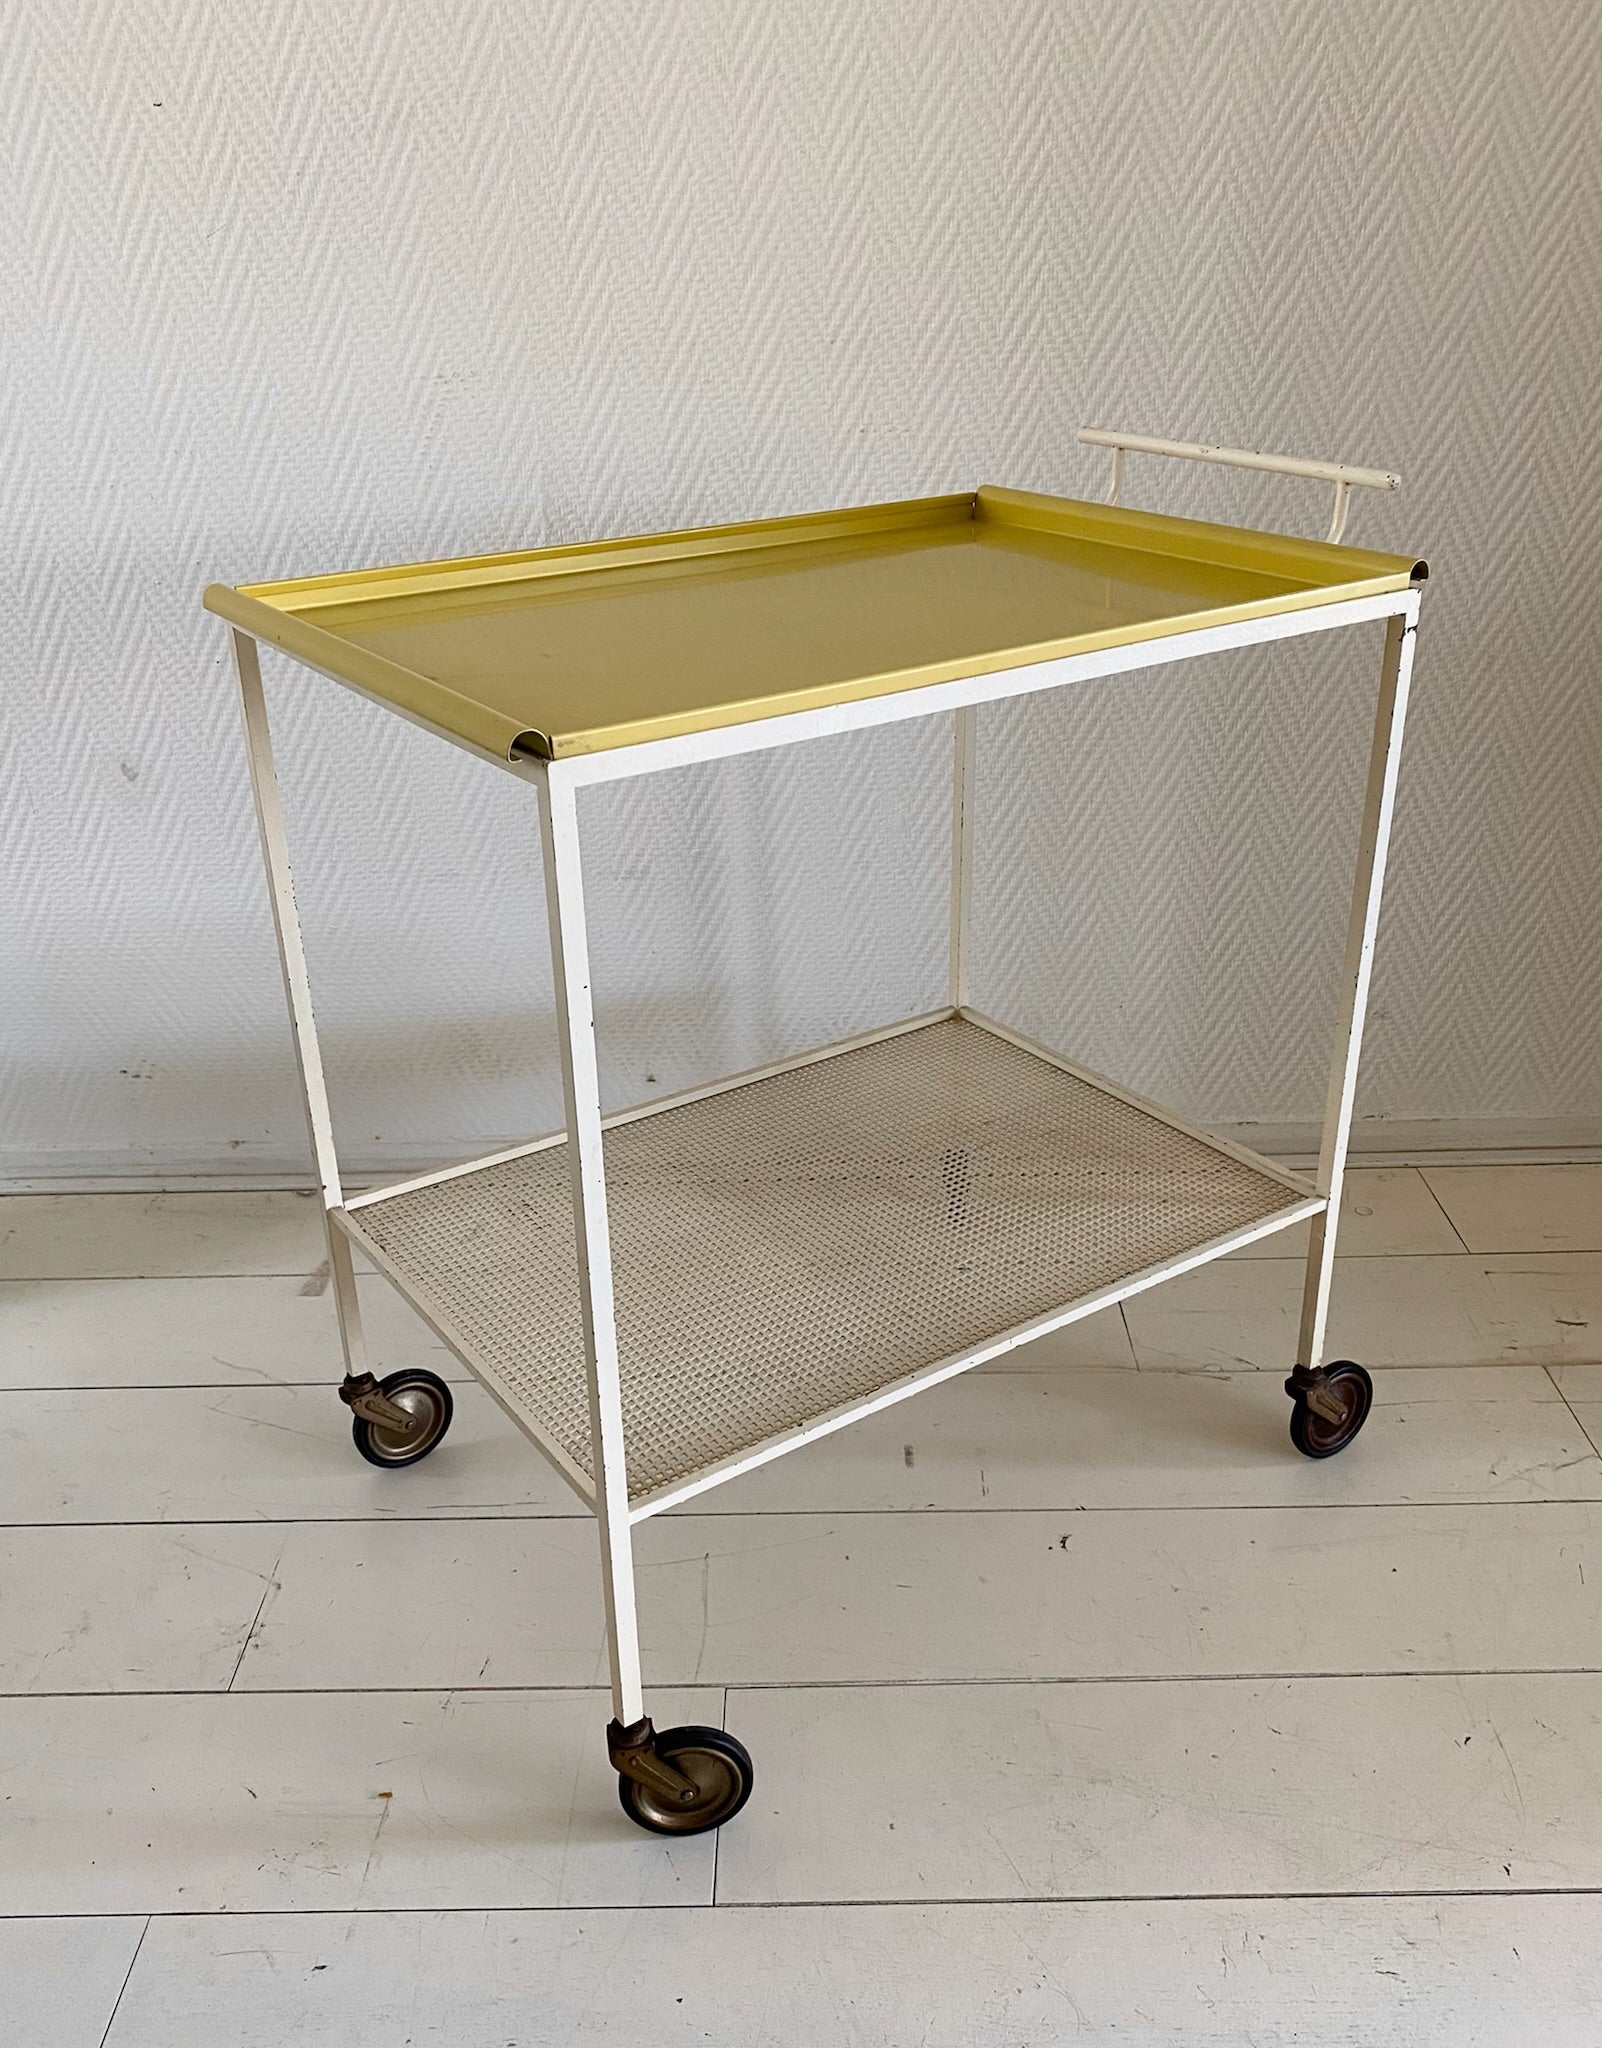 Striking bar cart or serving table, designed by Mathieu Matégot, ca. the 1950s.-1960s. The piece features an original Yellow tray, a cream/White Minimalist base with typical perforations. The piece remains in very good condition with normal signs of